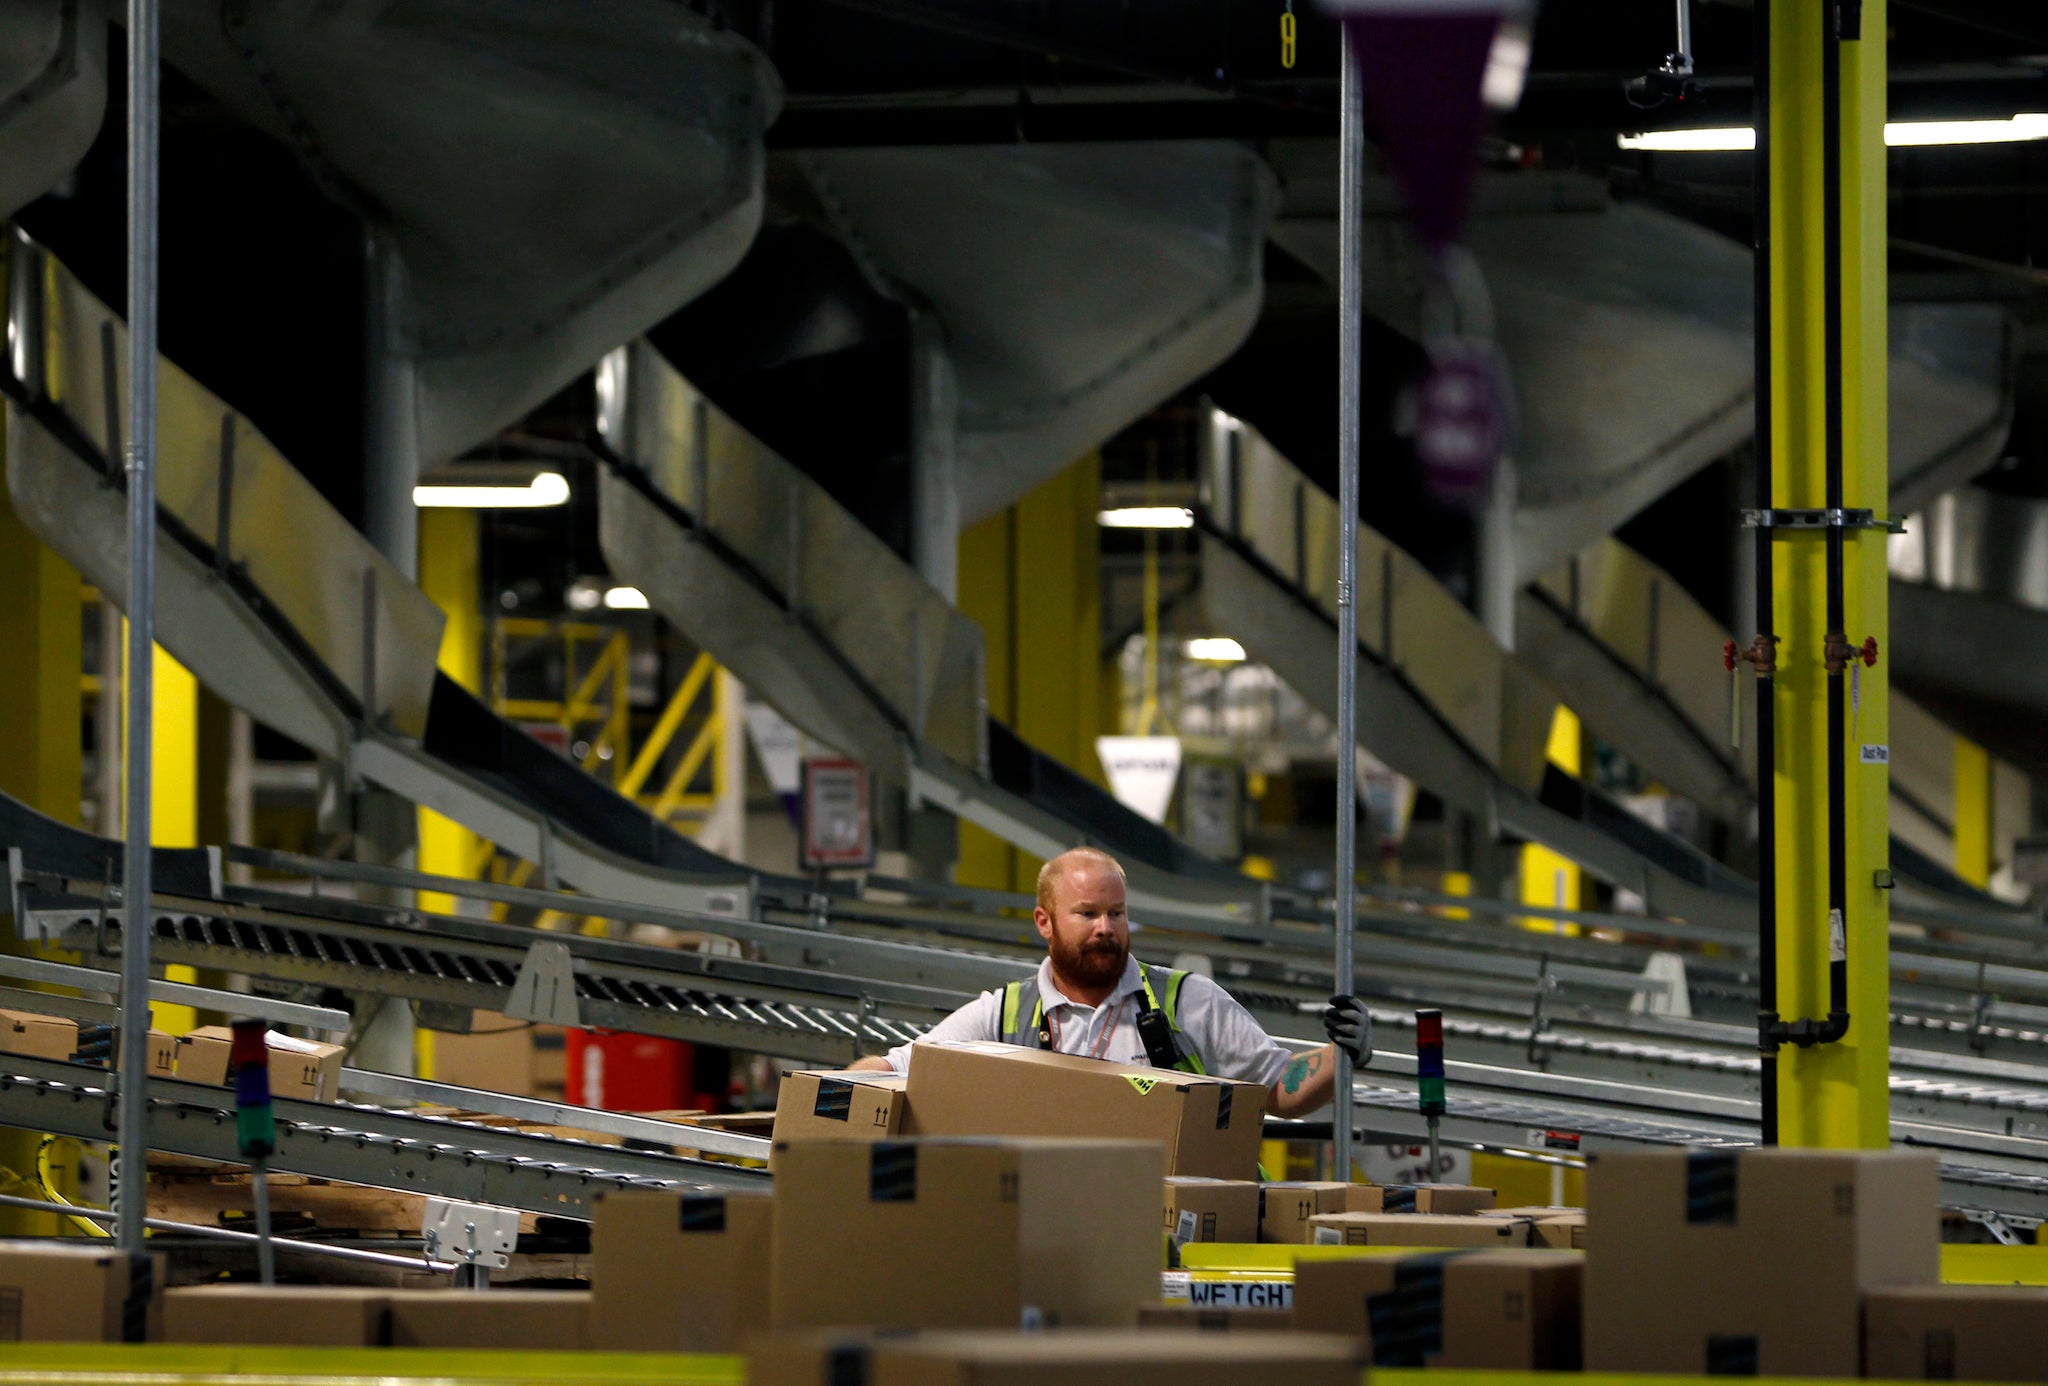 A worker keeps the flow of boxes for delivery moving in the shipping department at Amazon's distribution center in Phoenix, Arizona November 22, 2013